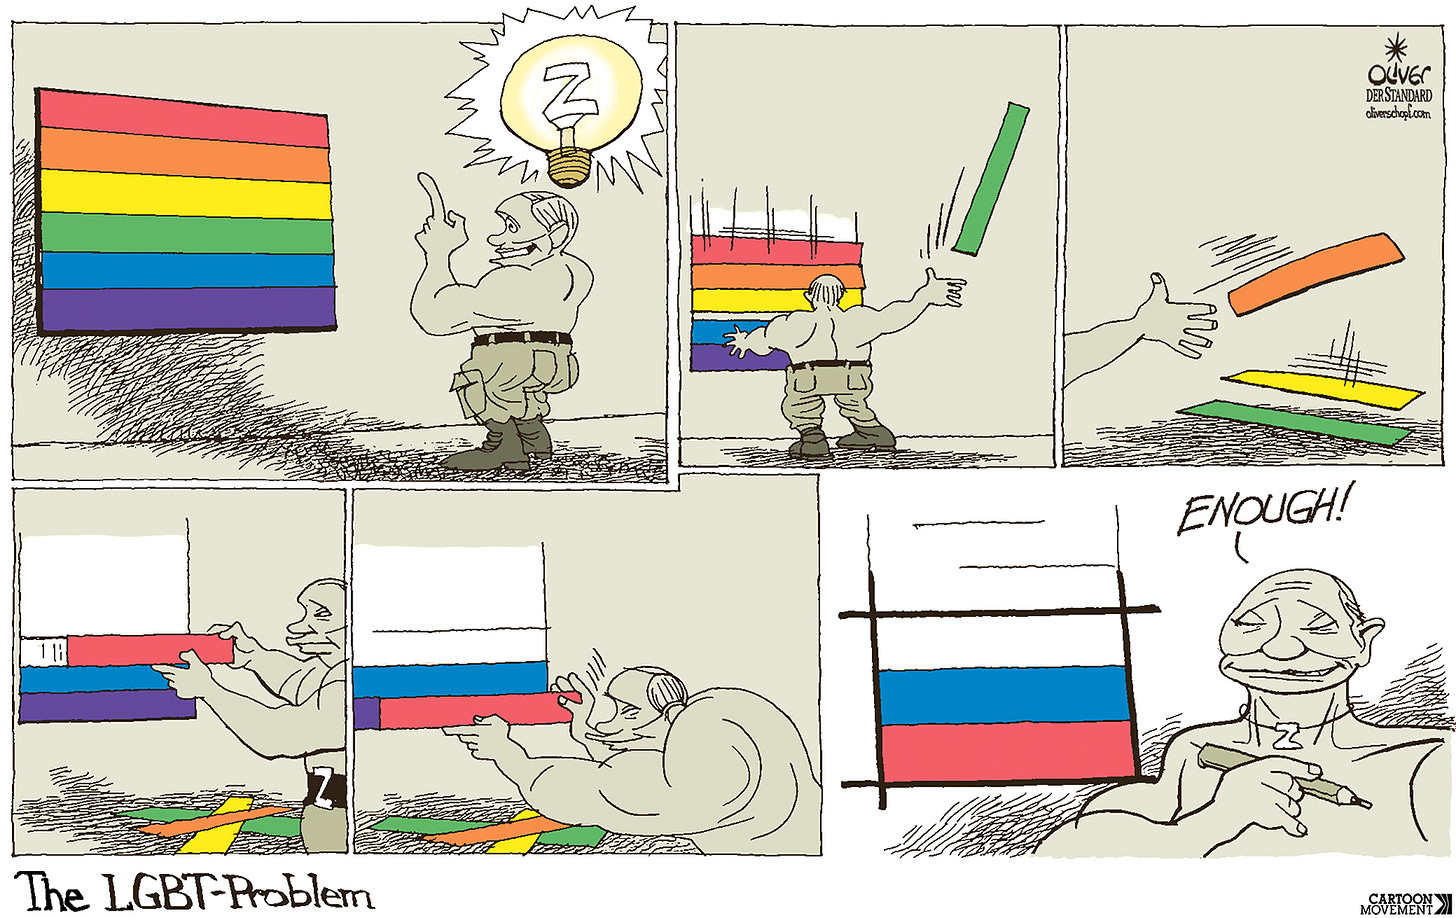 Cartoon showing Putin looking at a rainbow flag has he has an insight (a lightbulb appears above his head) in the first  panel. In the second and third panel he removes strips of color from the rainbow flag. In panel s four and five he replaces them with the three colours of the Russian flag. In the final panel he is smugly facing the viewer, saying: ‘enough!’. The caption below the cartoon reads: ‘The LGBT problem’